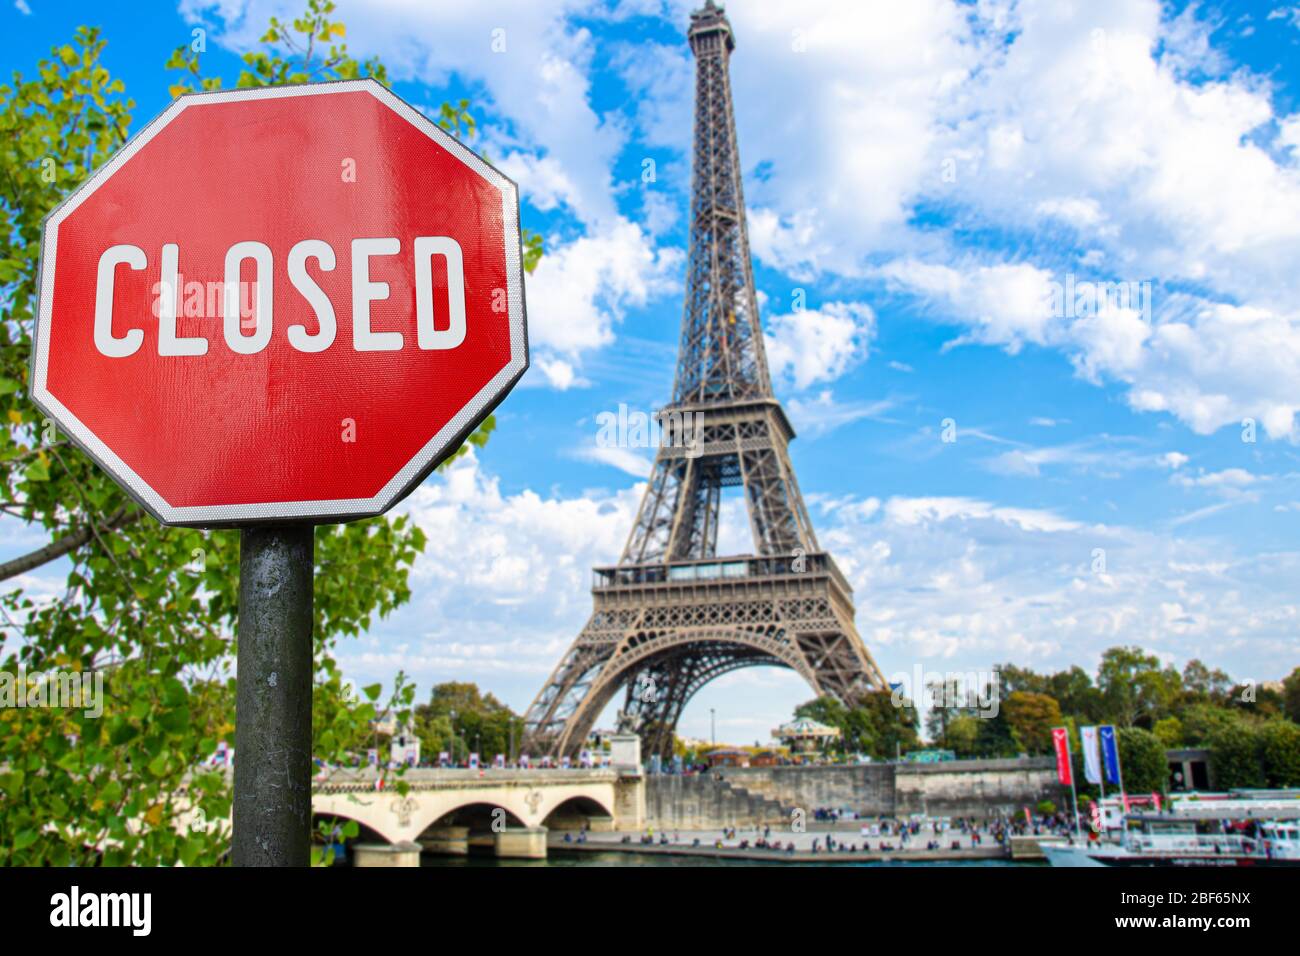 Closed, close stop sign with Eiffel tower background in Paris, France. Closed facilities because of corona virus. COVID-19 pandemic quarantine. Stock Photo